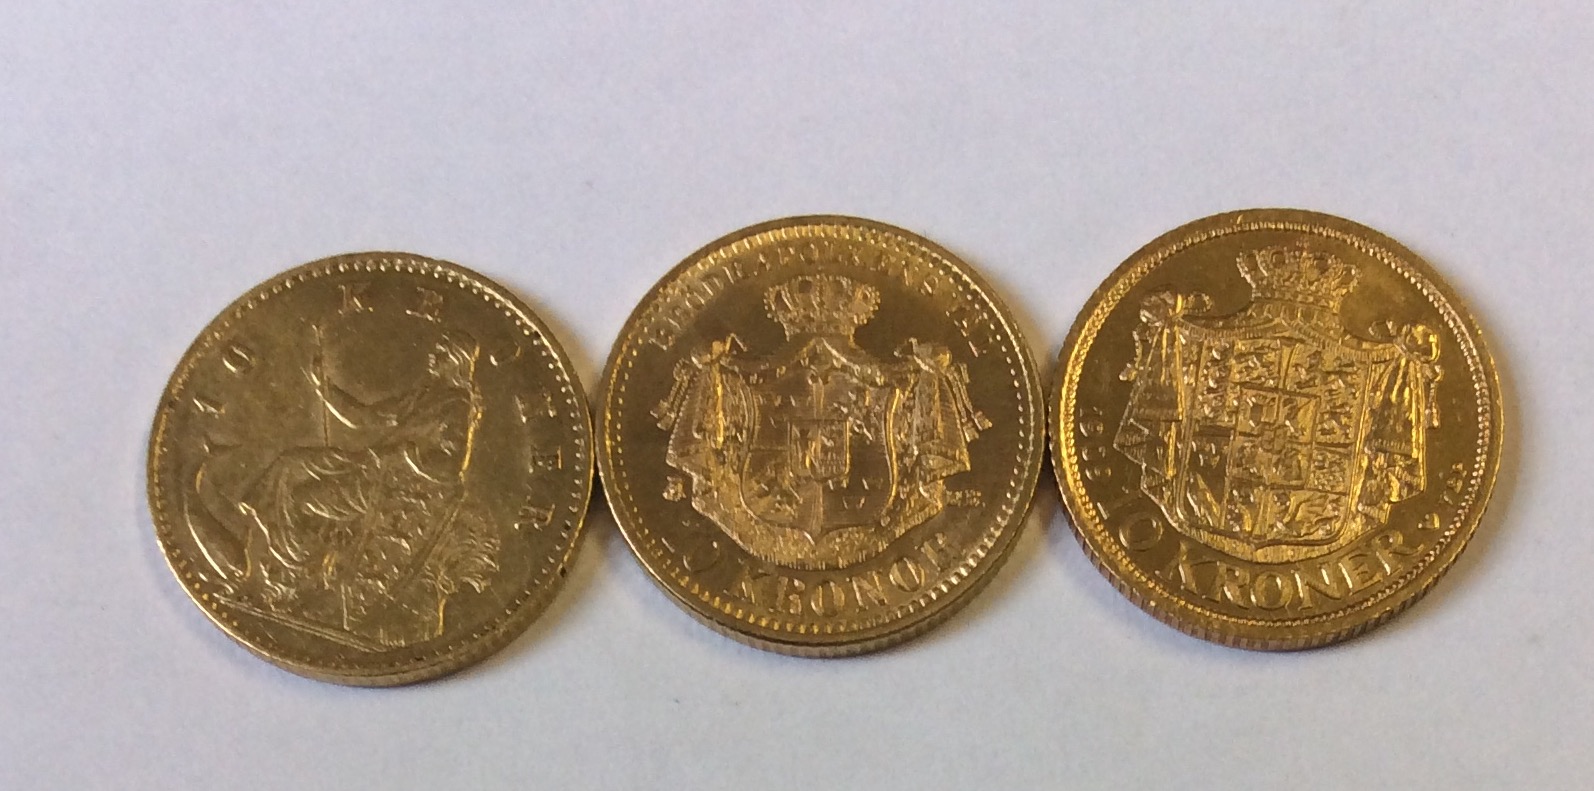 A COLLECTION OF THREE DANISH 22CT GOLD TEN KRONER COINS, DATED 1909, 1901 and 1874 Bearing the Royal